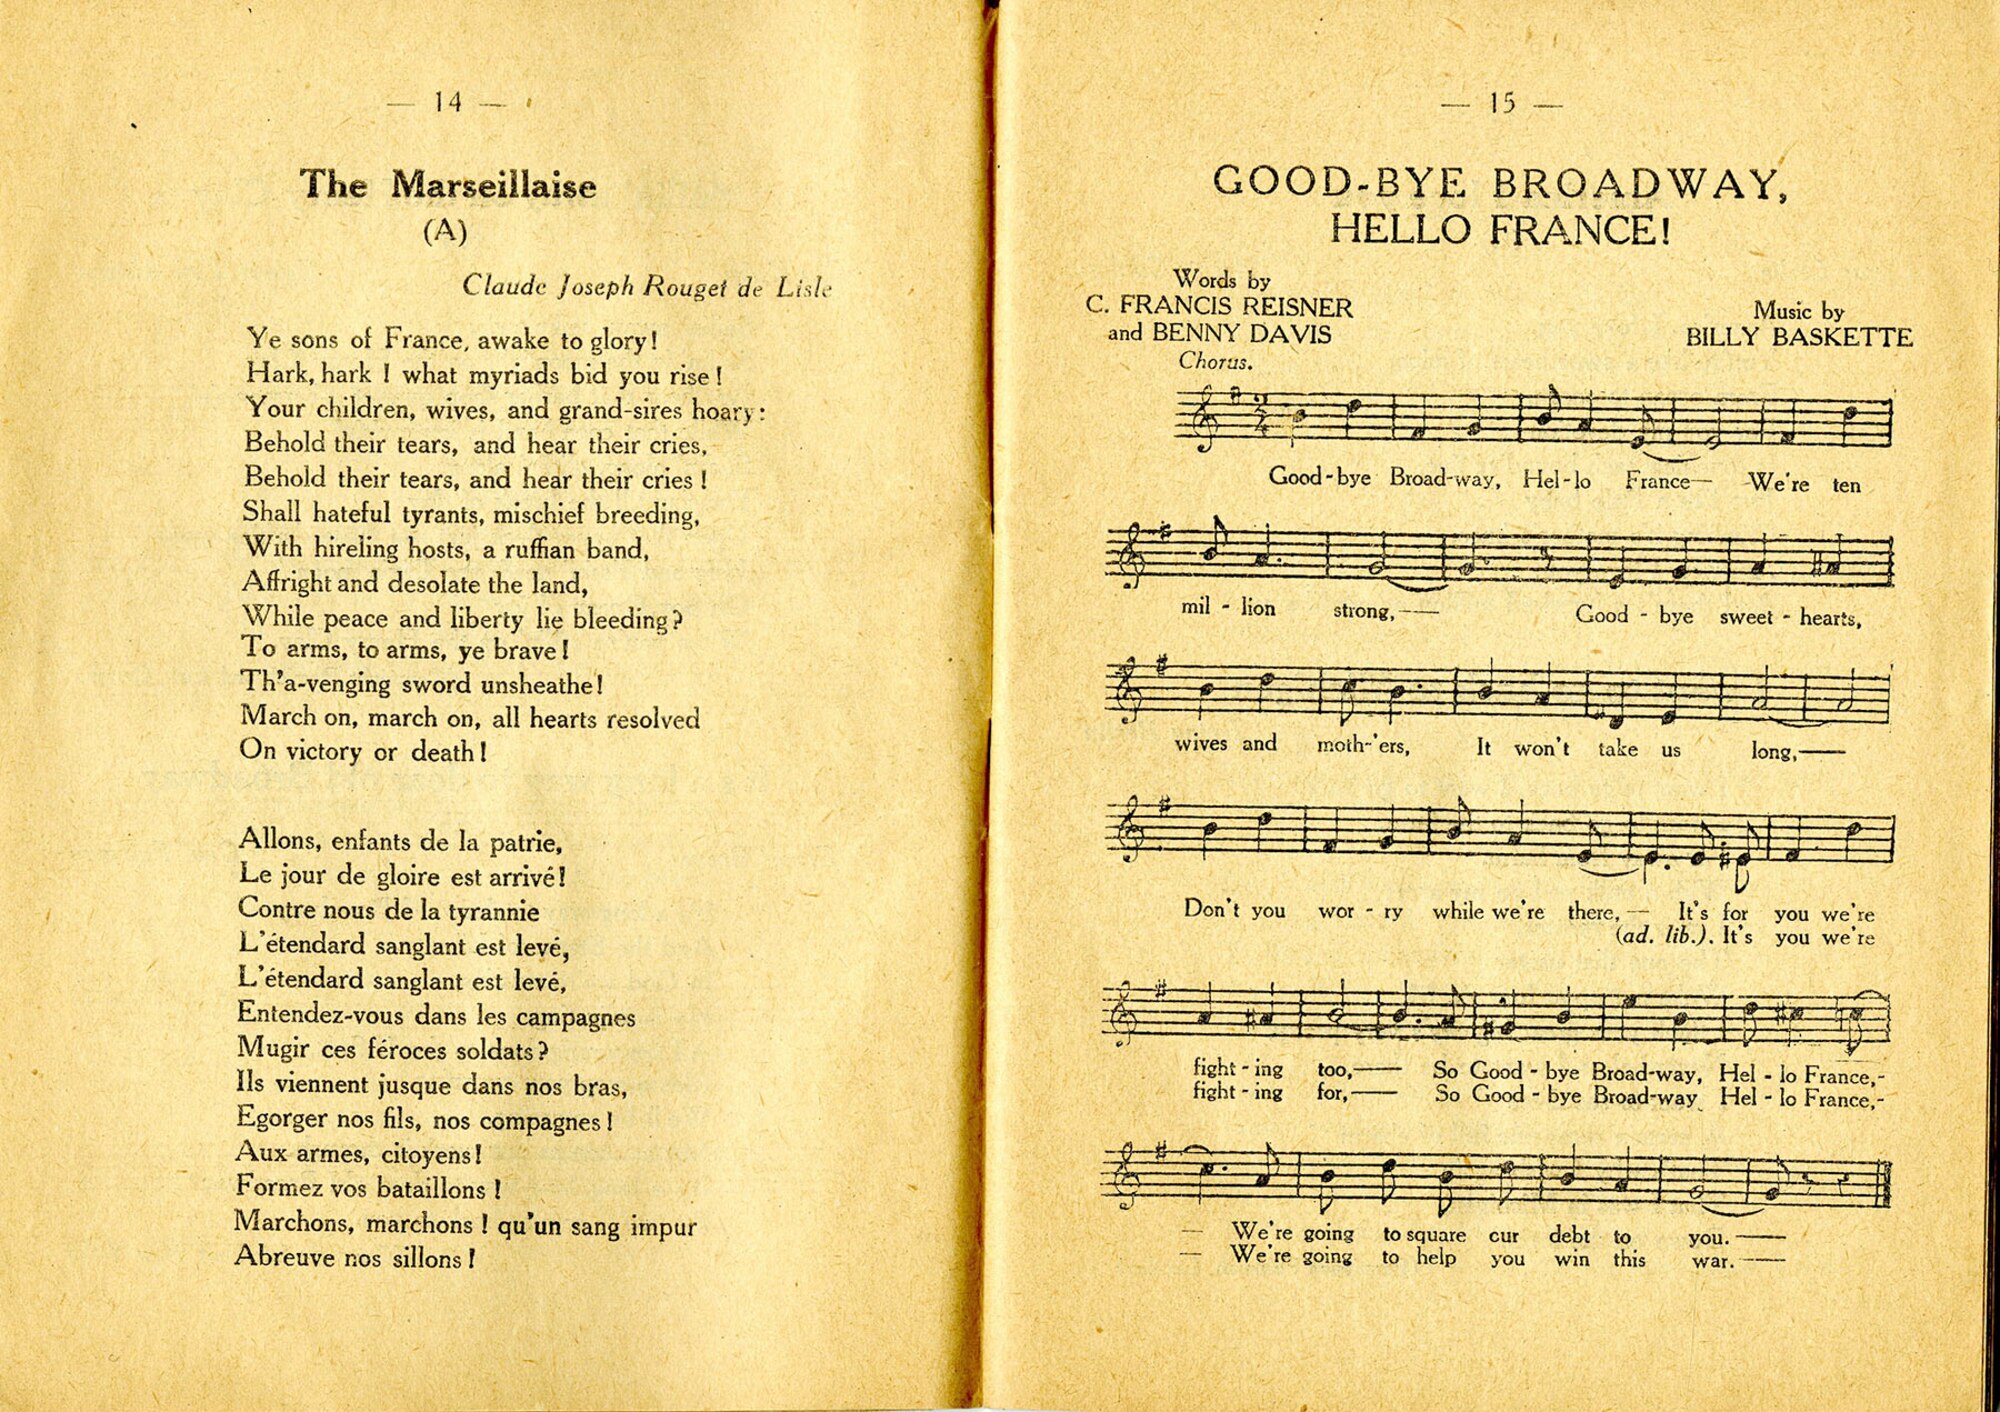 This song booklet, compiled and distributed by the YMCA, was a staple among the soldiers of the American Expeditionary Forces during World War I. (U.S. Air Force photo)